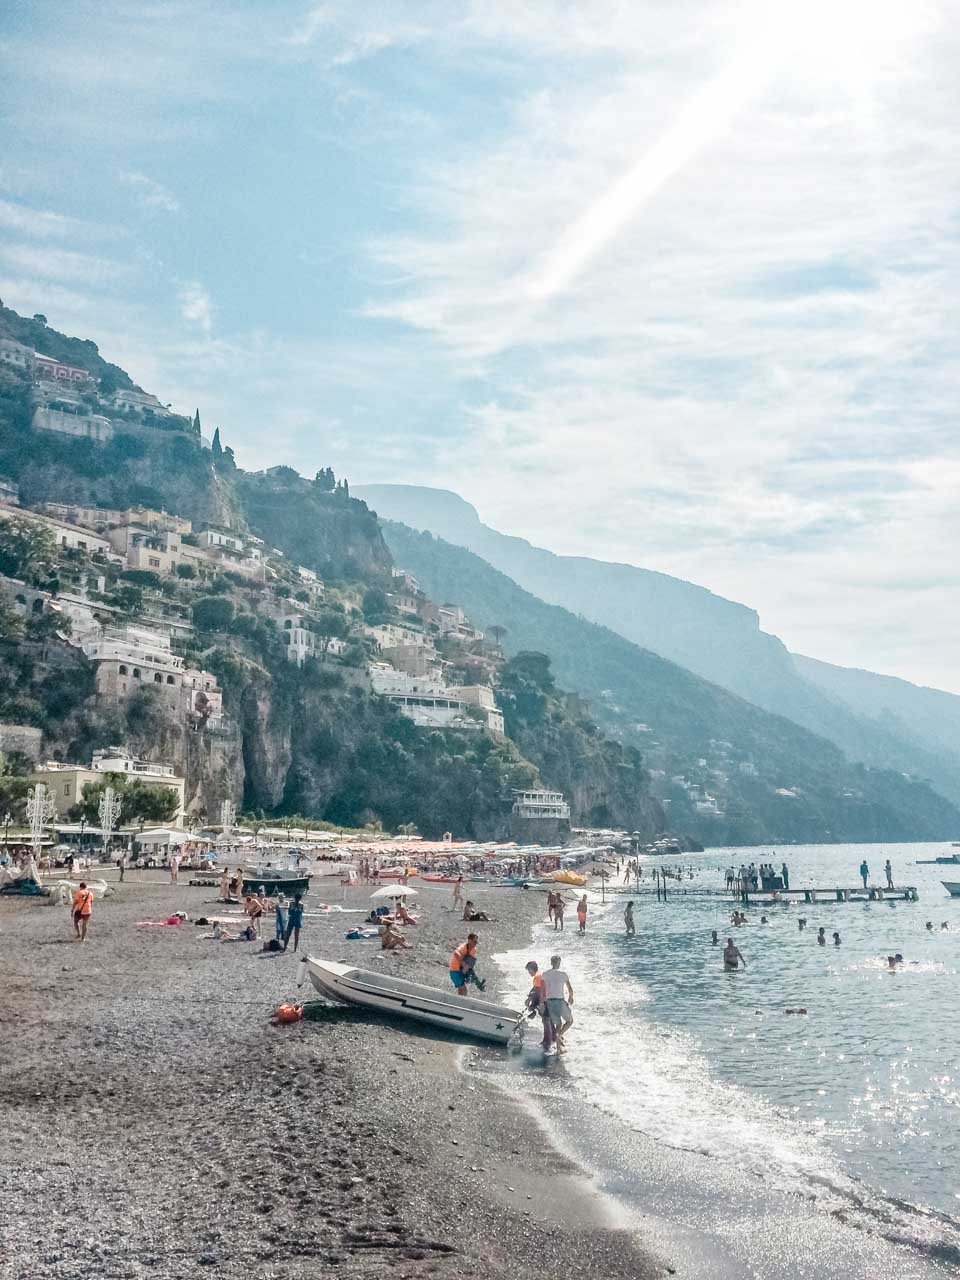 Tourists on the beach in Positano, Italy